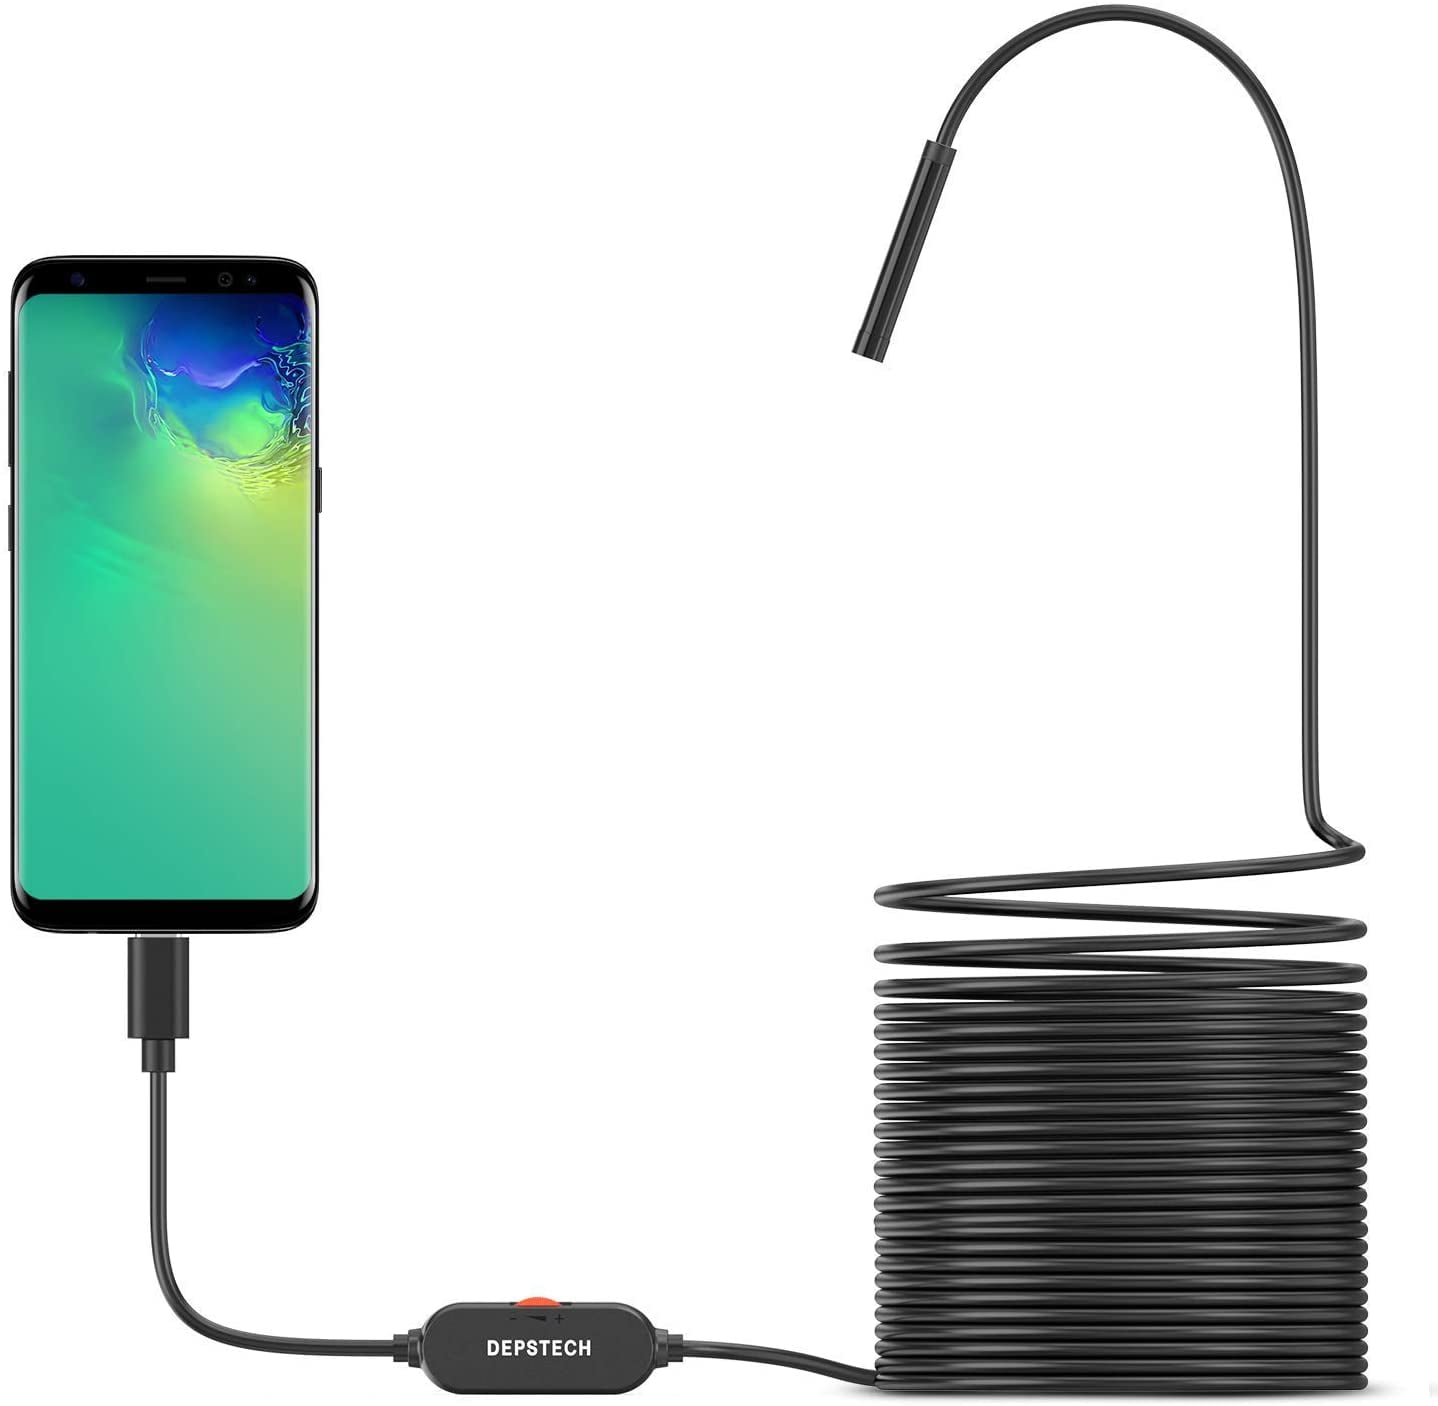 WiFi Borescope Snake Camera Inspection Camera IP67 Waterproof 2.0 Mega Pixel with 8 Adjustable LED Lights 5 Meter Cable for Android/IOS Smartphone Windows/Mac Tablet Andiker Wireless Endoscope